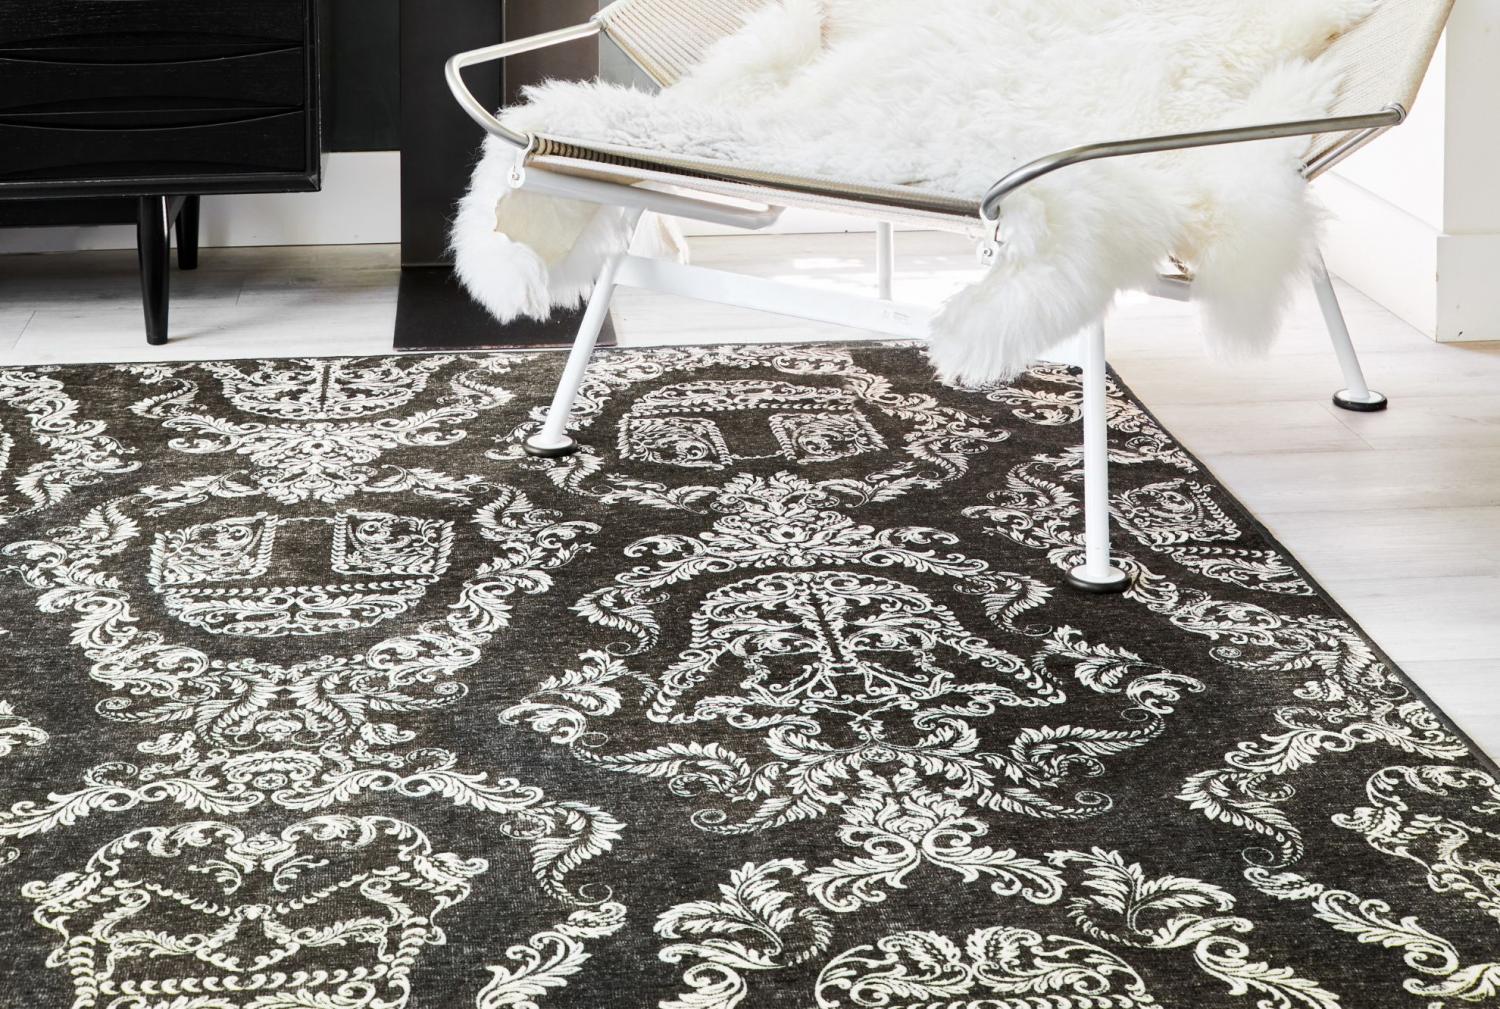 Subtle Star Wars Themed Rugs - Ruggable Star Wars Rugs